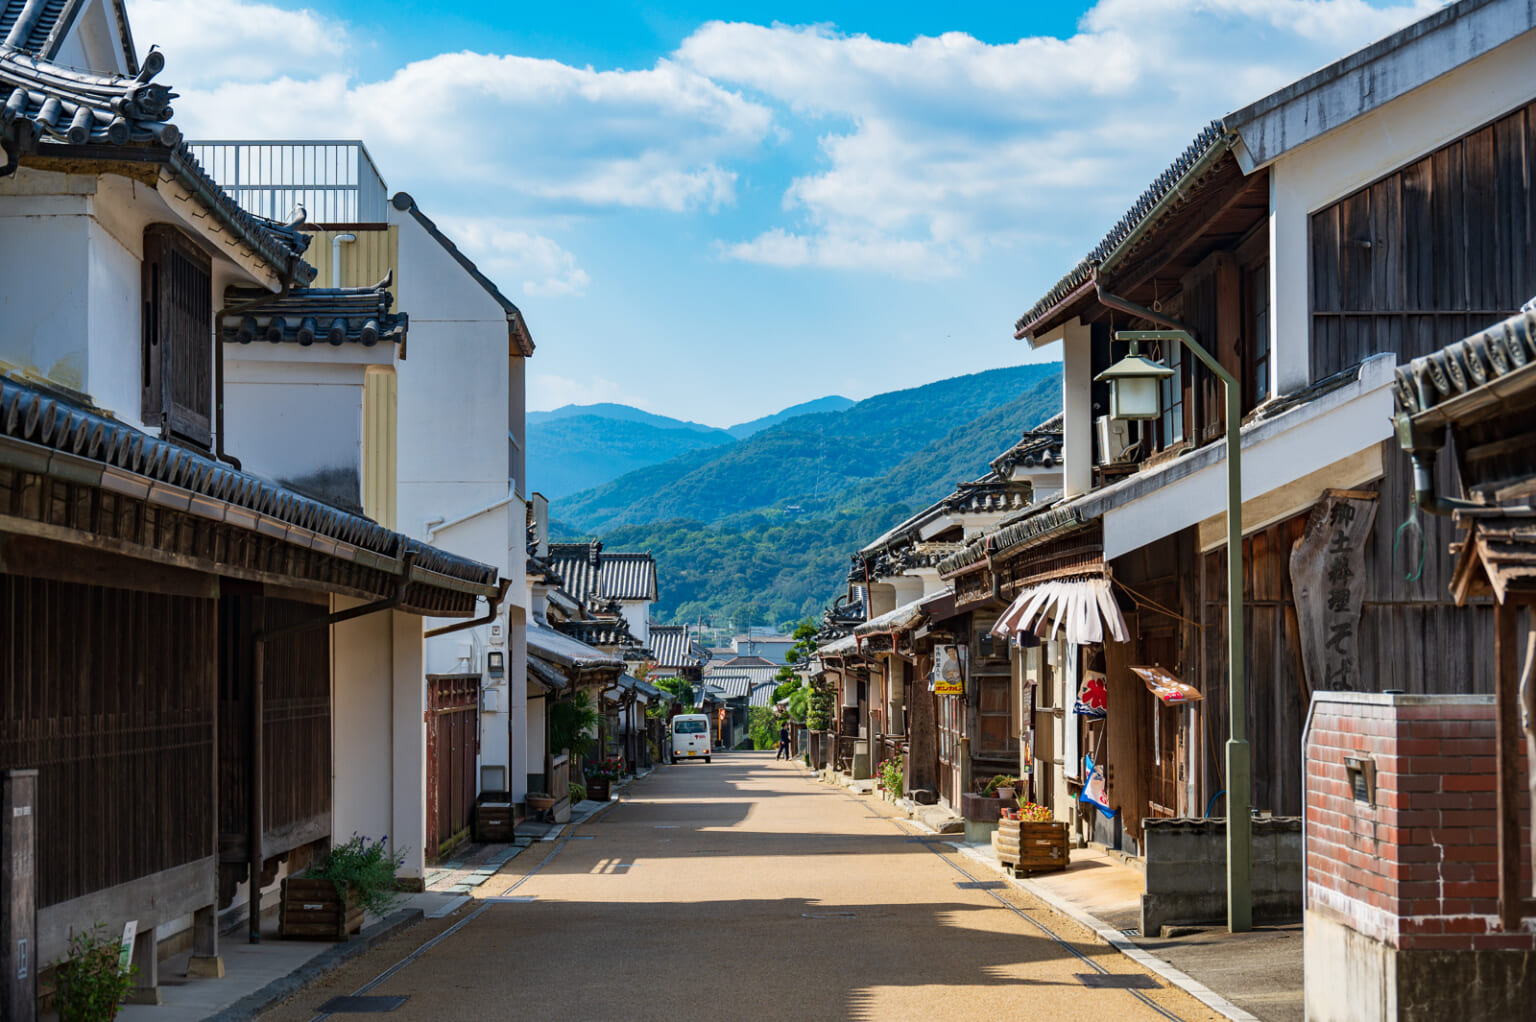 The 5 Best Arts and Crafts Experiences to Try on Japan's Shikoku Island